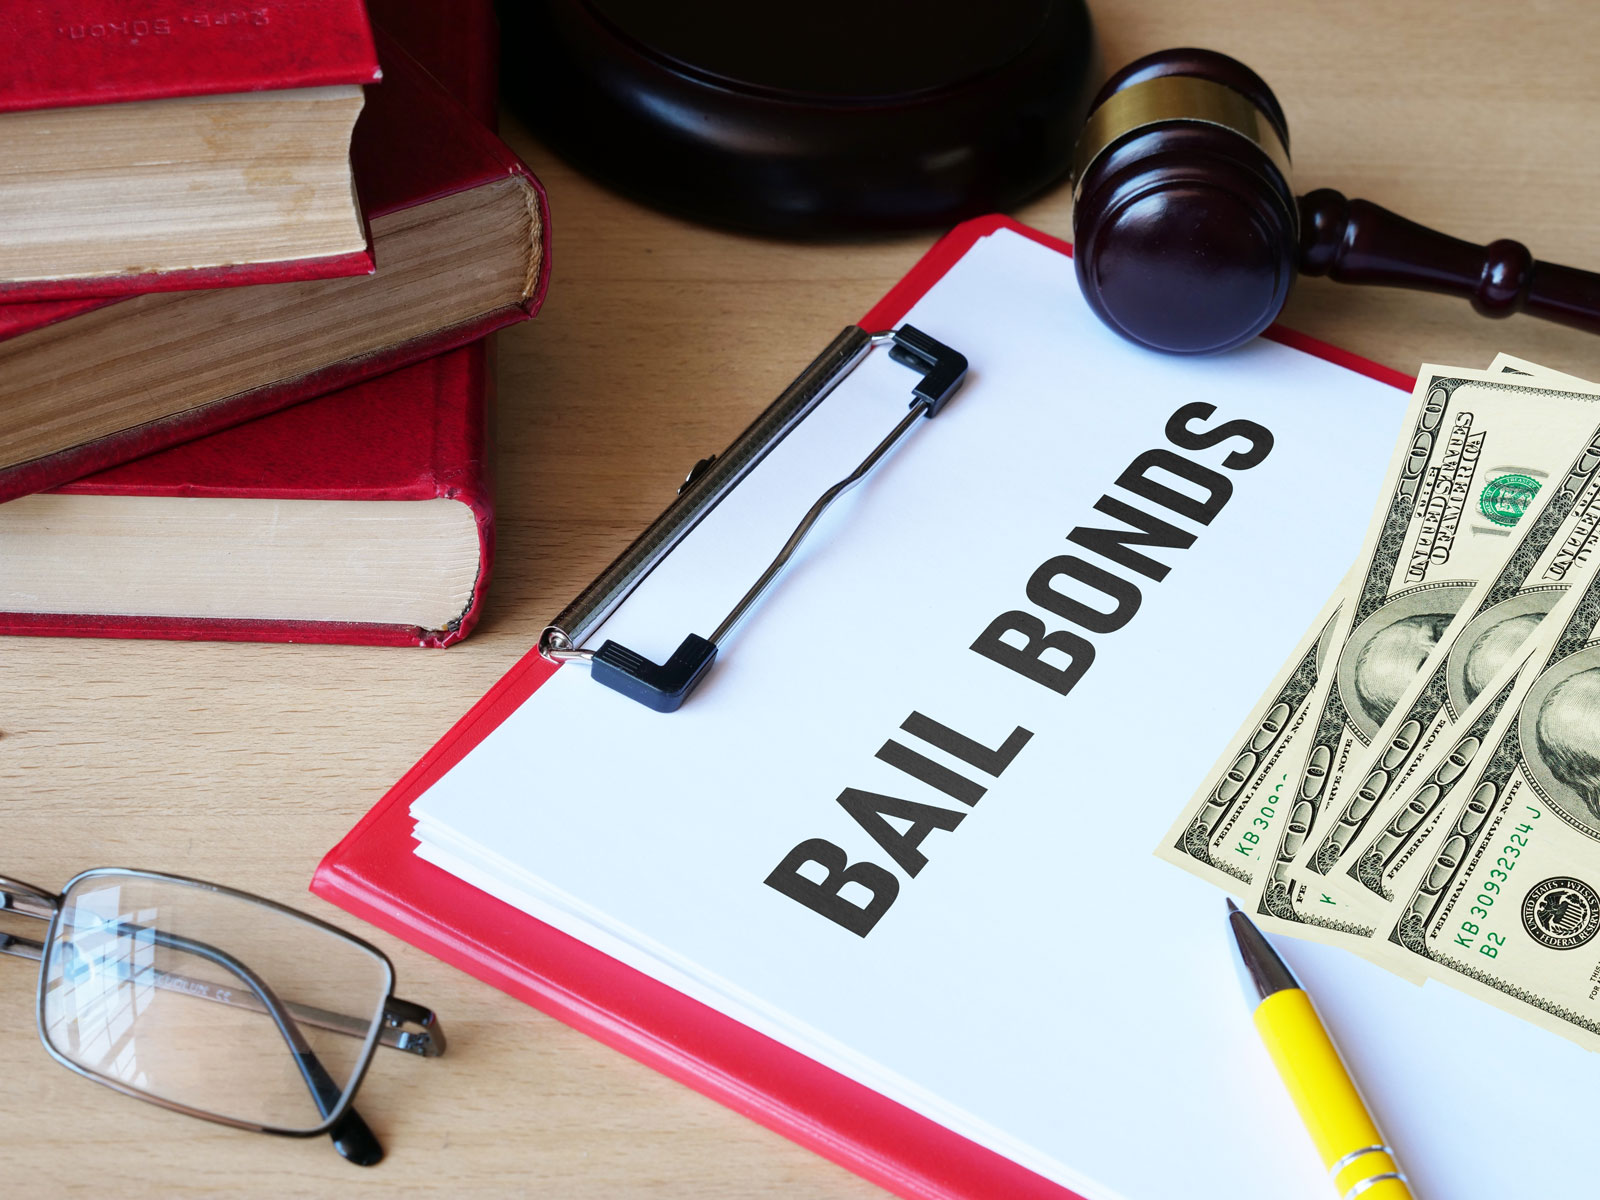 What Does Bail Mean?